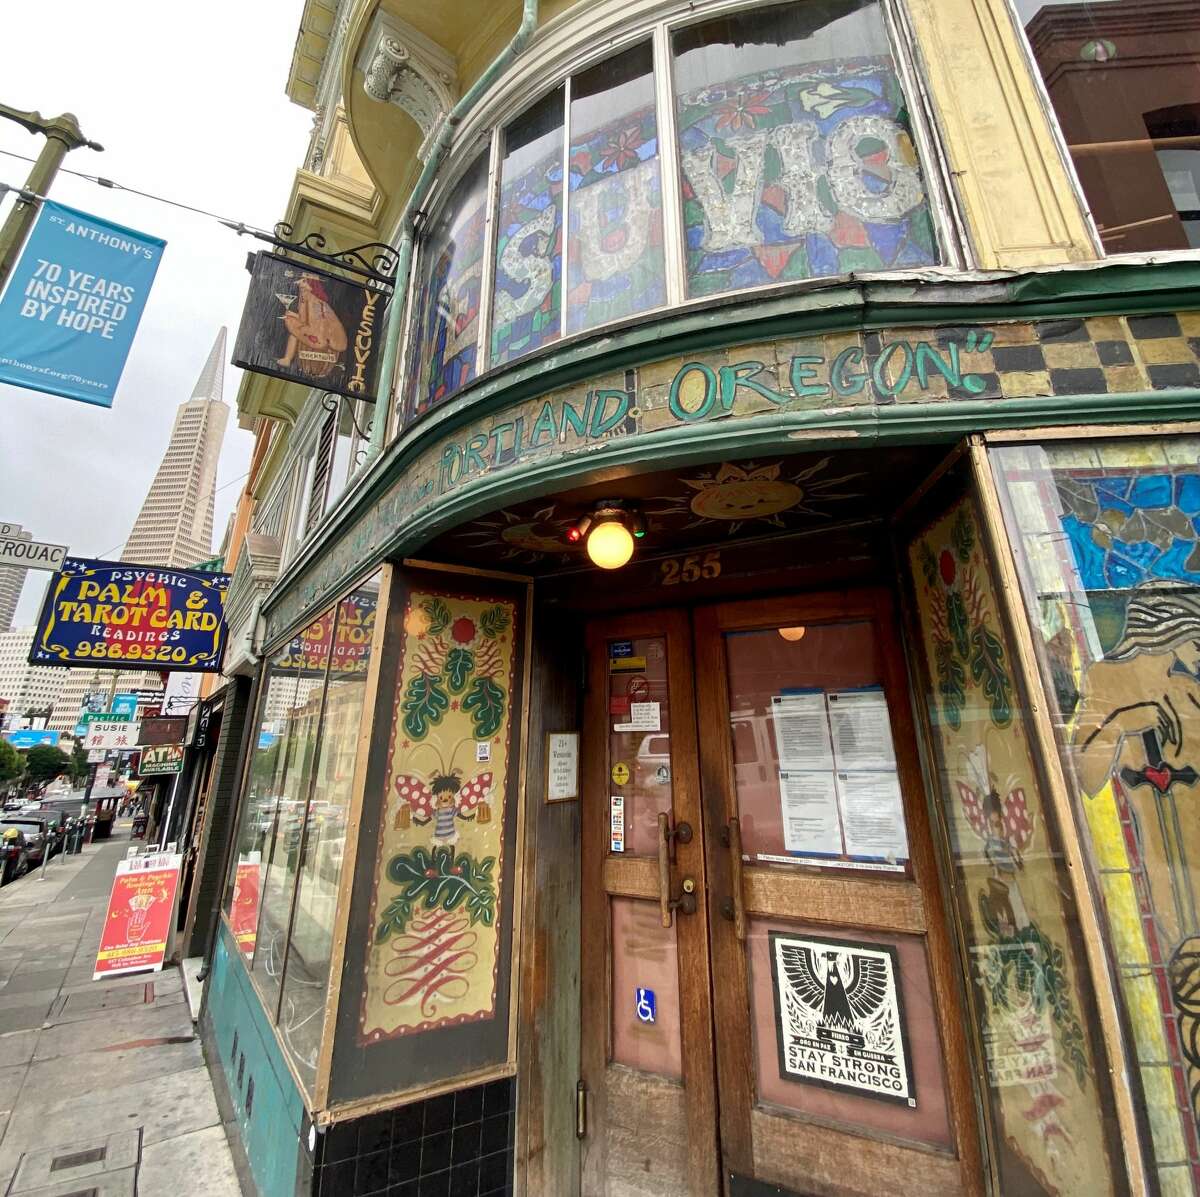 Vesuvio Cafe is requiring proof of vaccination at their establishment, as of Tuesday.